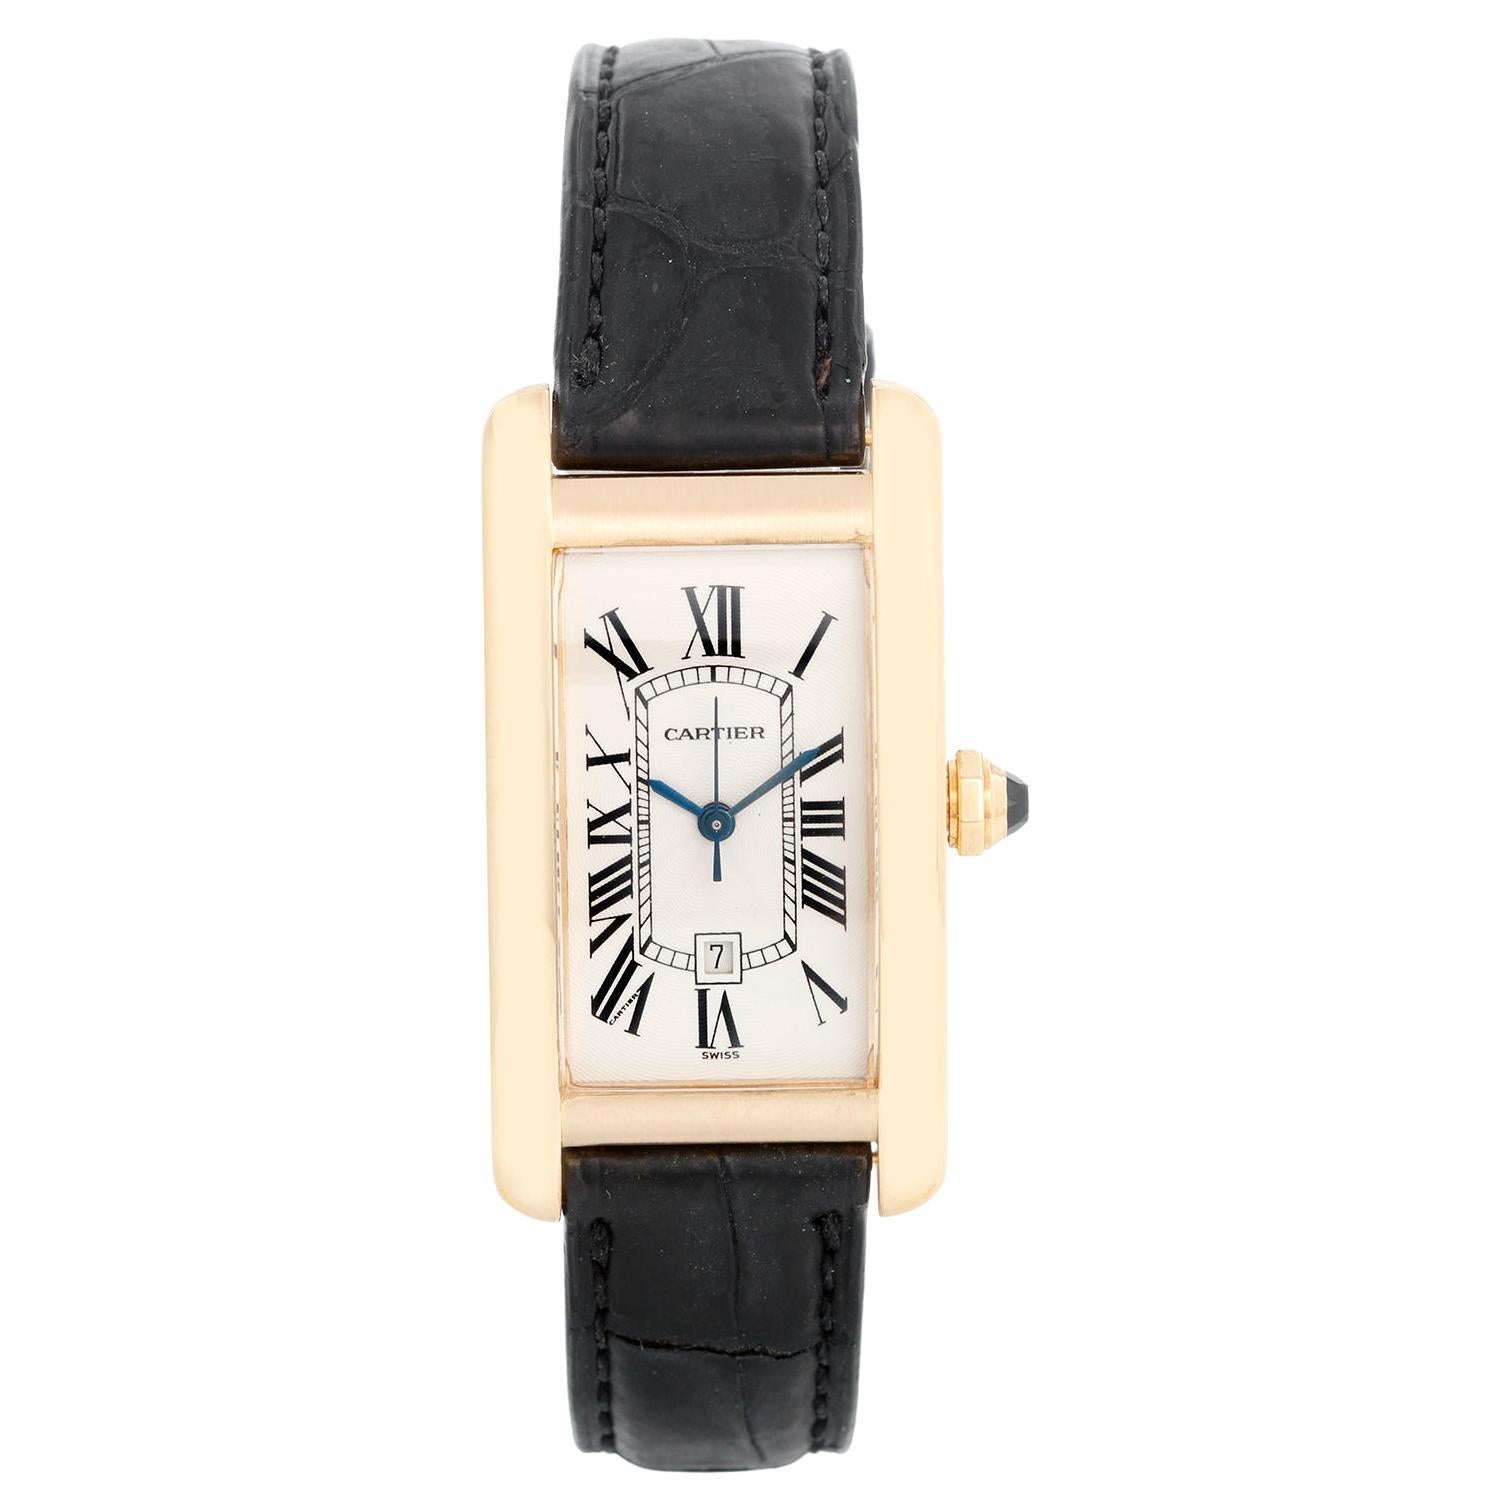 Cartier Tank Americaine 'or American' Men's Gold Watch W2603156